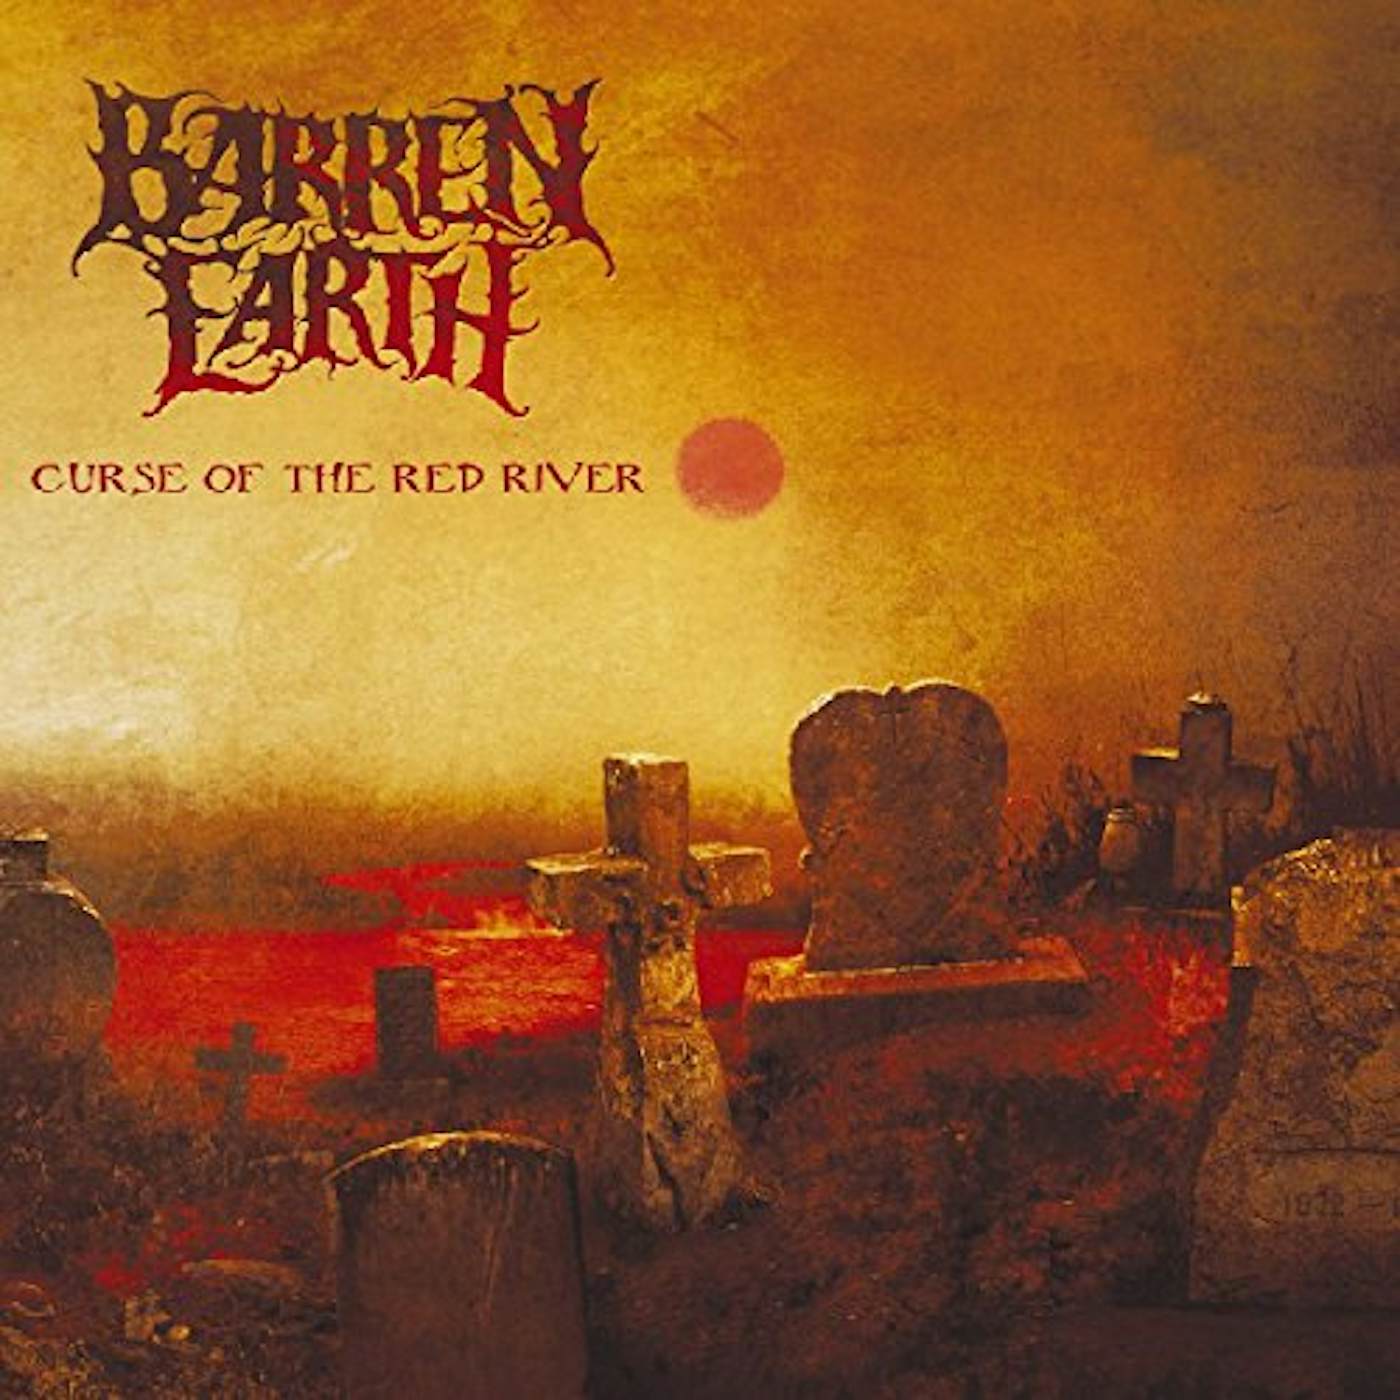 Barren Earth CURSE OF THE RED RIVER CD